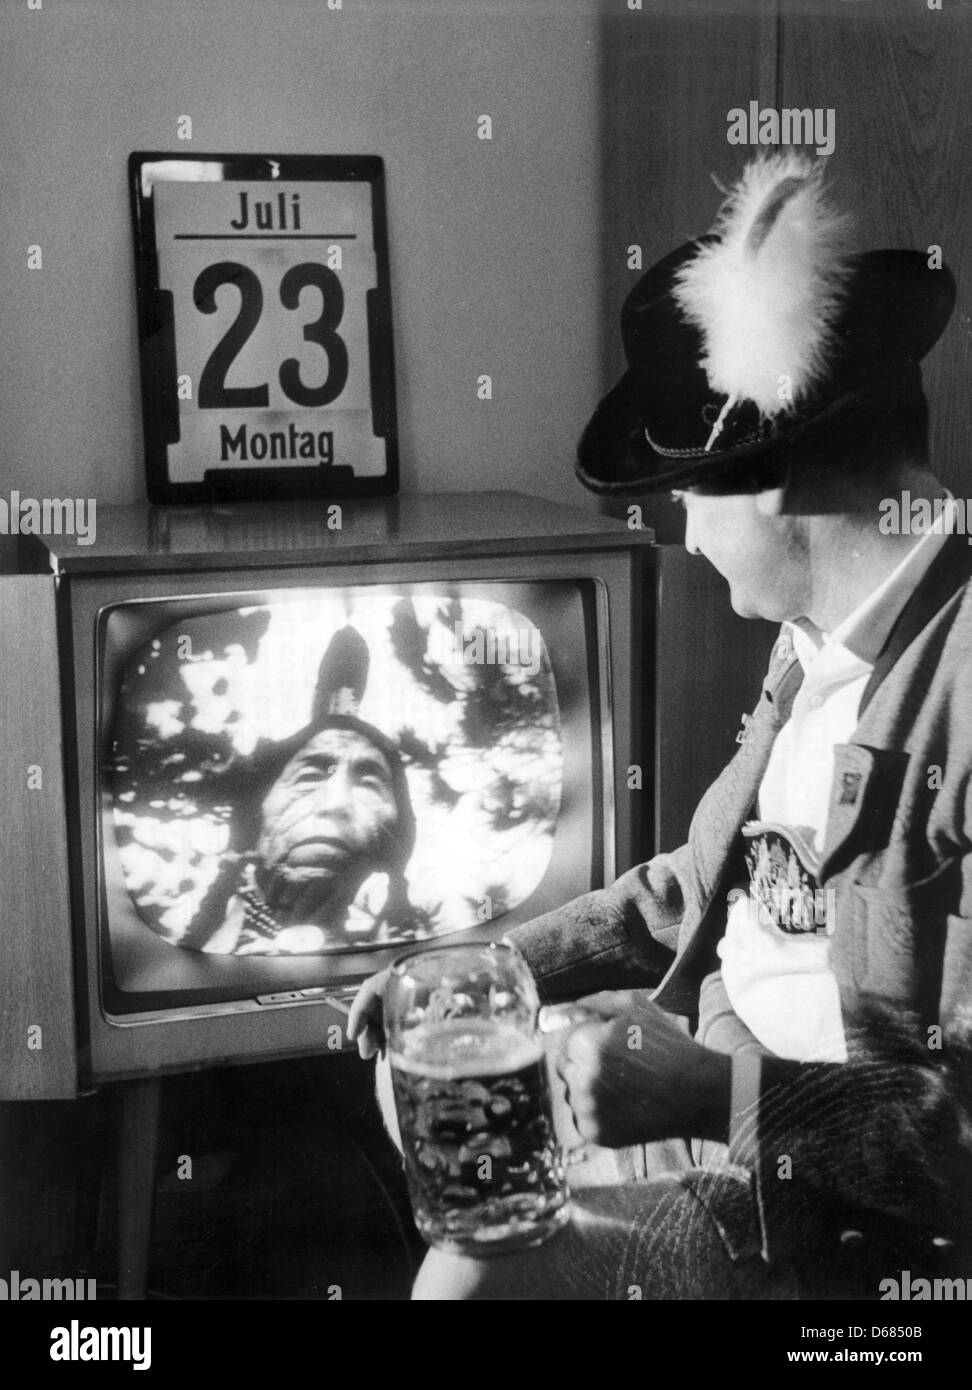 (dpa FILE) - An archive picture, dated 23 July 2012, shows a Bavarian man in traditional clothing cheering with a glass of beer while watching the live broadcast of a western on his television set at his home in Bavaria, Germany, 23 July 1962. The civilian communications satellite Telstar was launched from Cape Canaveral on 10 July 1962 enabling the first live broadcast of televise Stock Photo